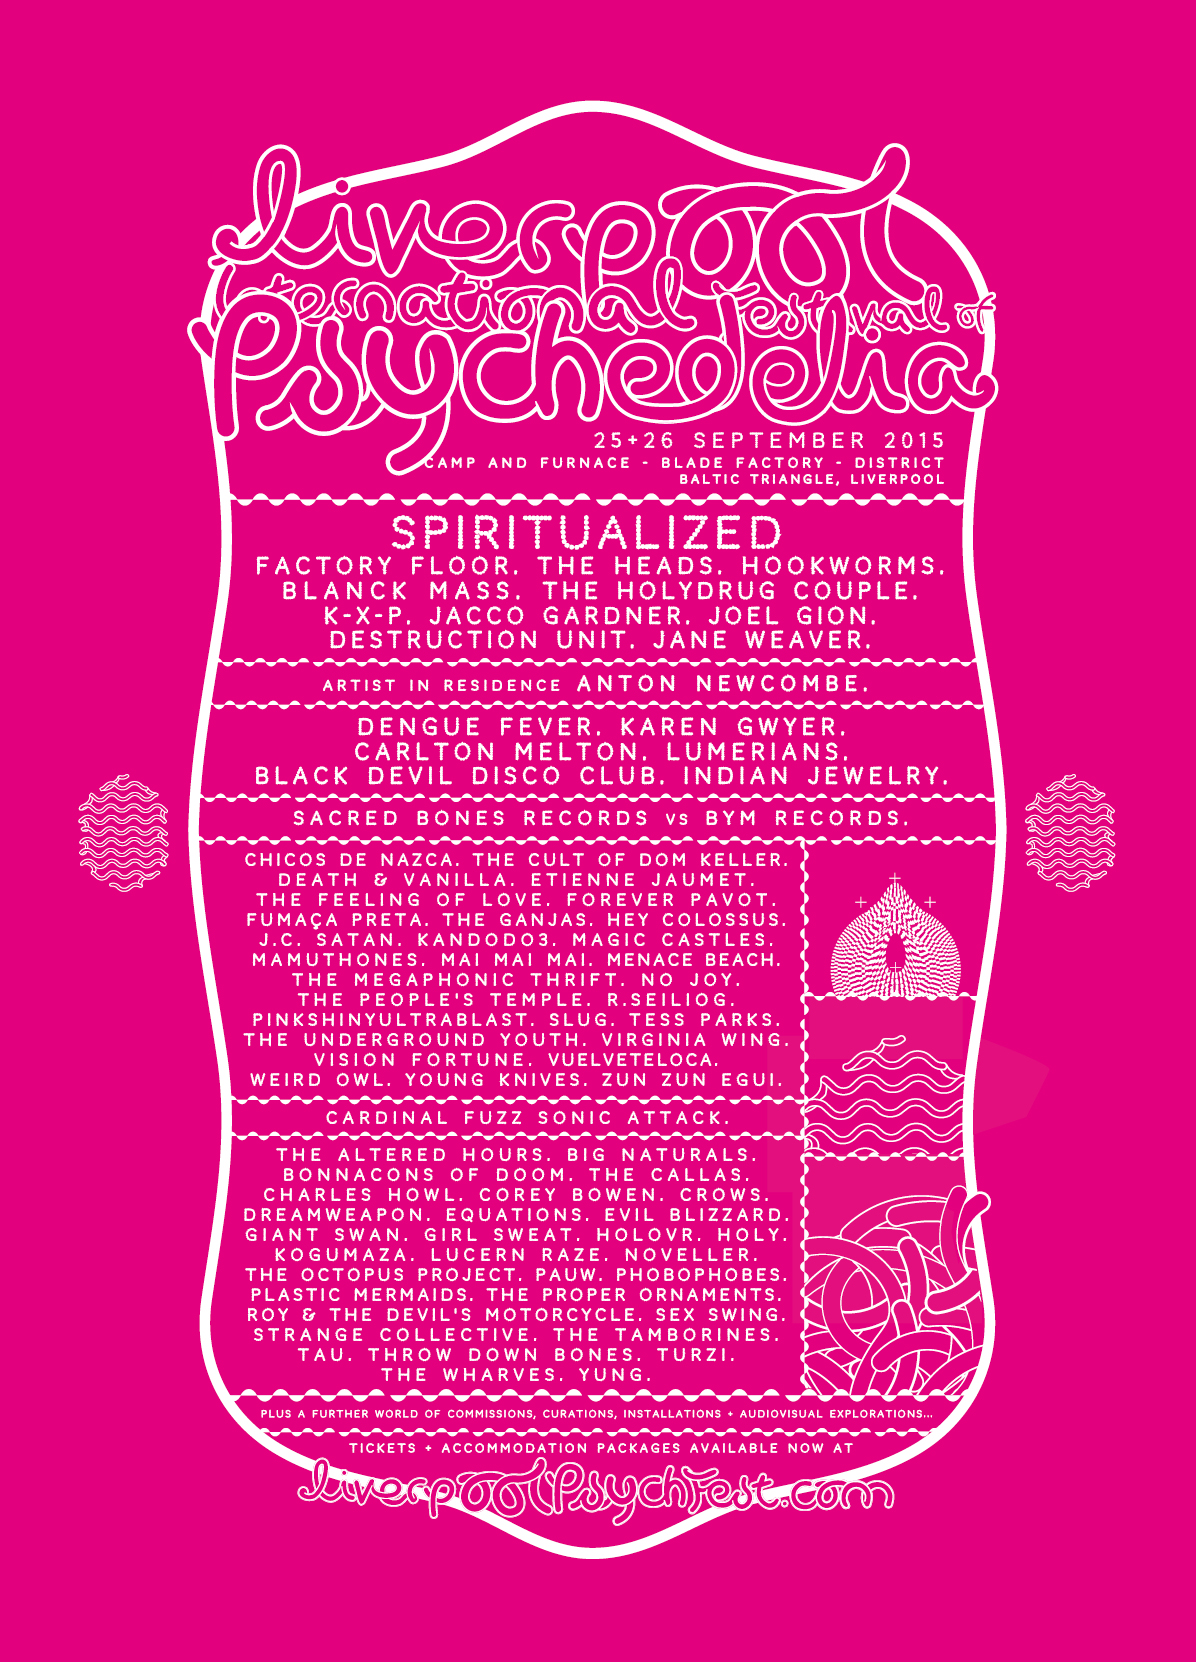 NEWS: more acts announced for Liverpool Psych 2015